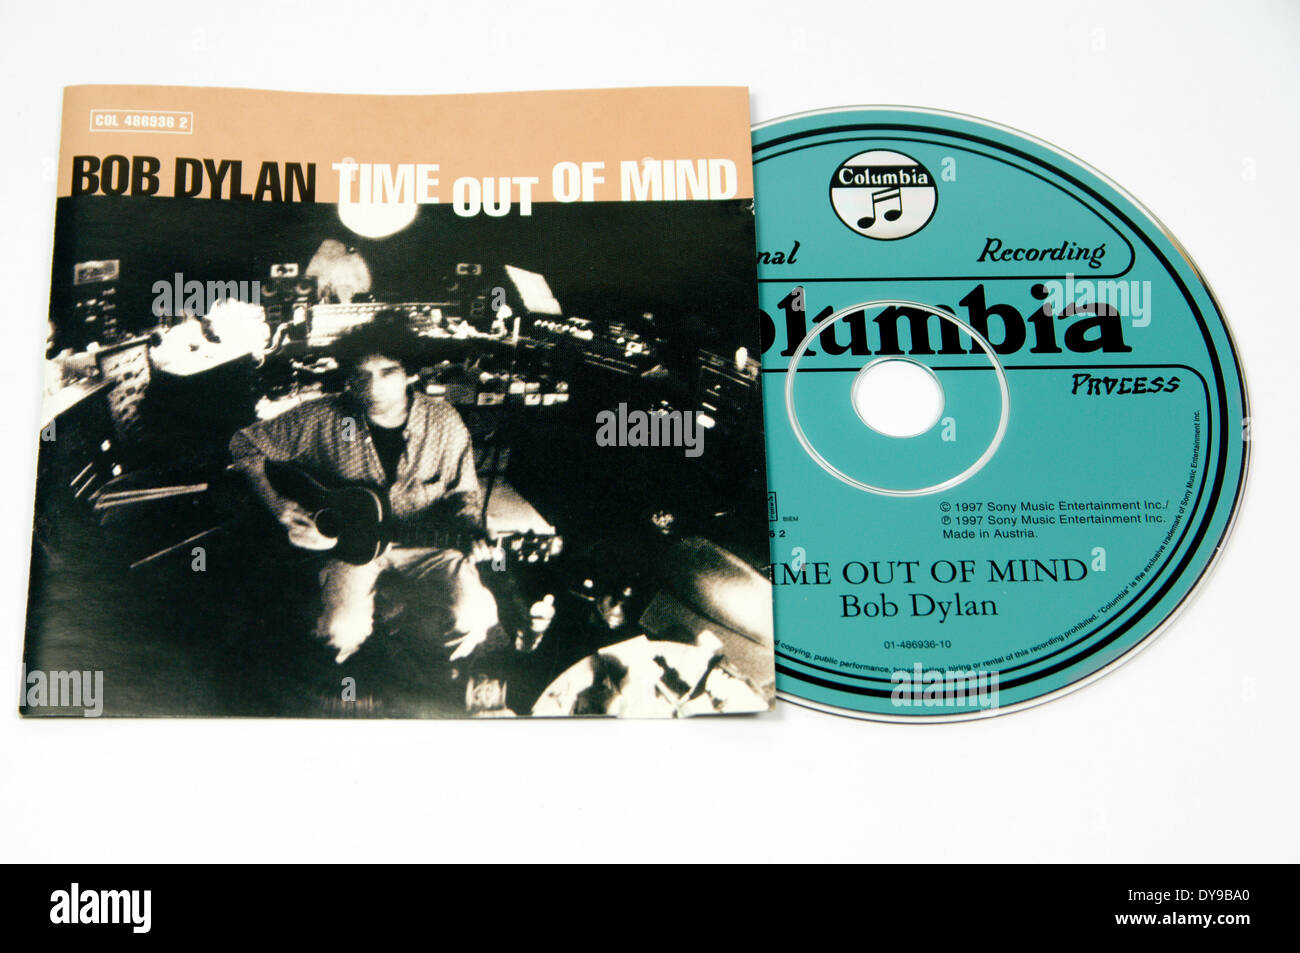 Bob Dylan Time Out Of Mind Album. Stockfoto